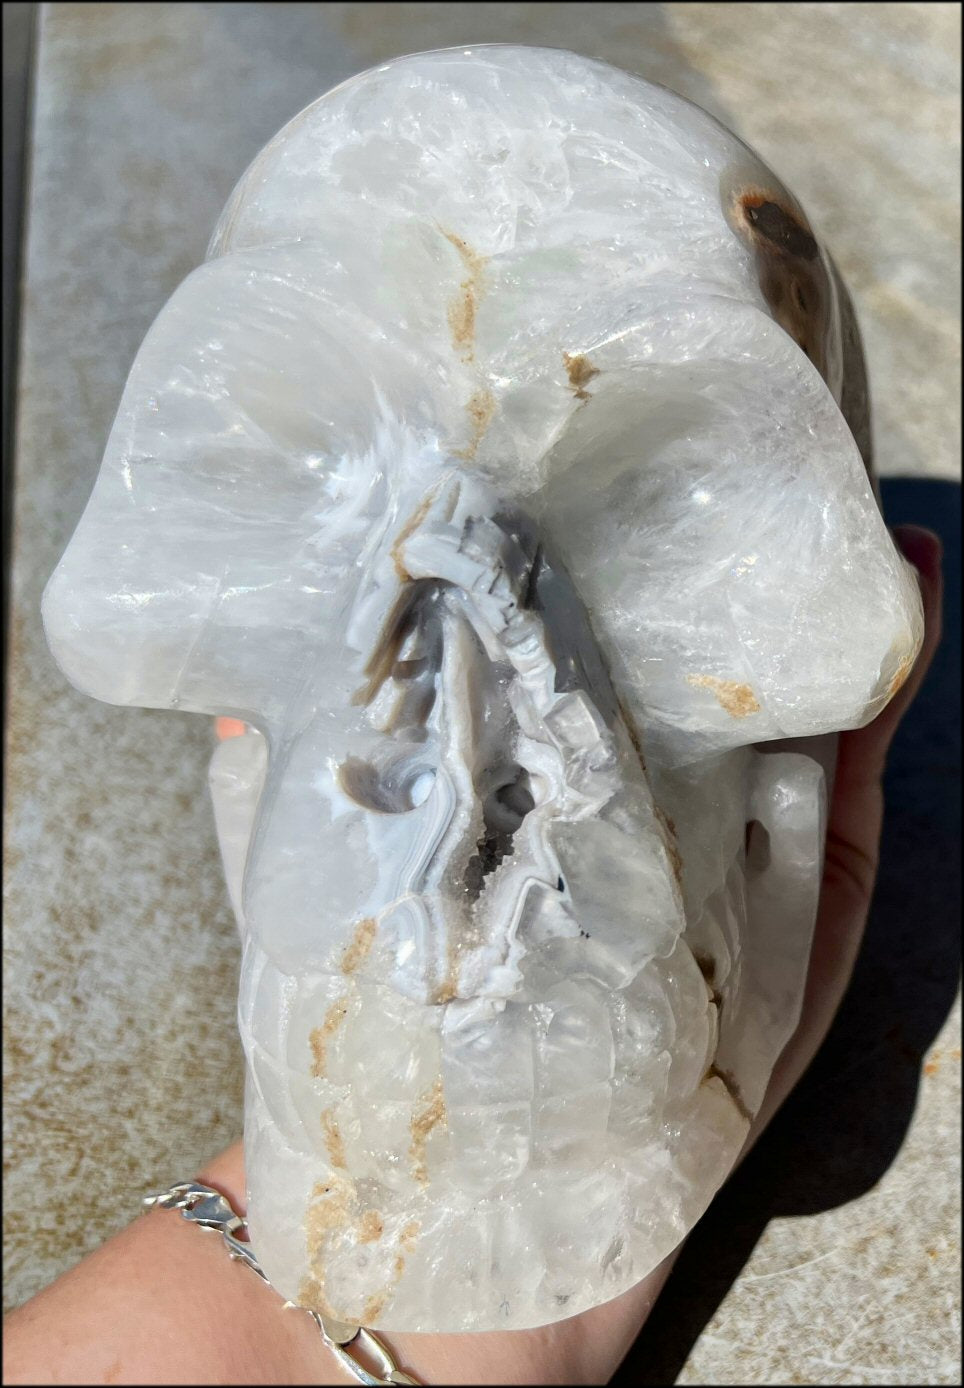 LifeSize Agate GEODE Crystal Skull with Super Cool Druzy Lined Facial VUG!